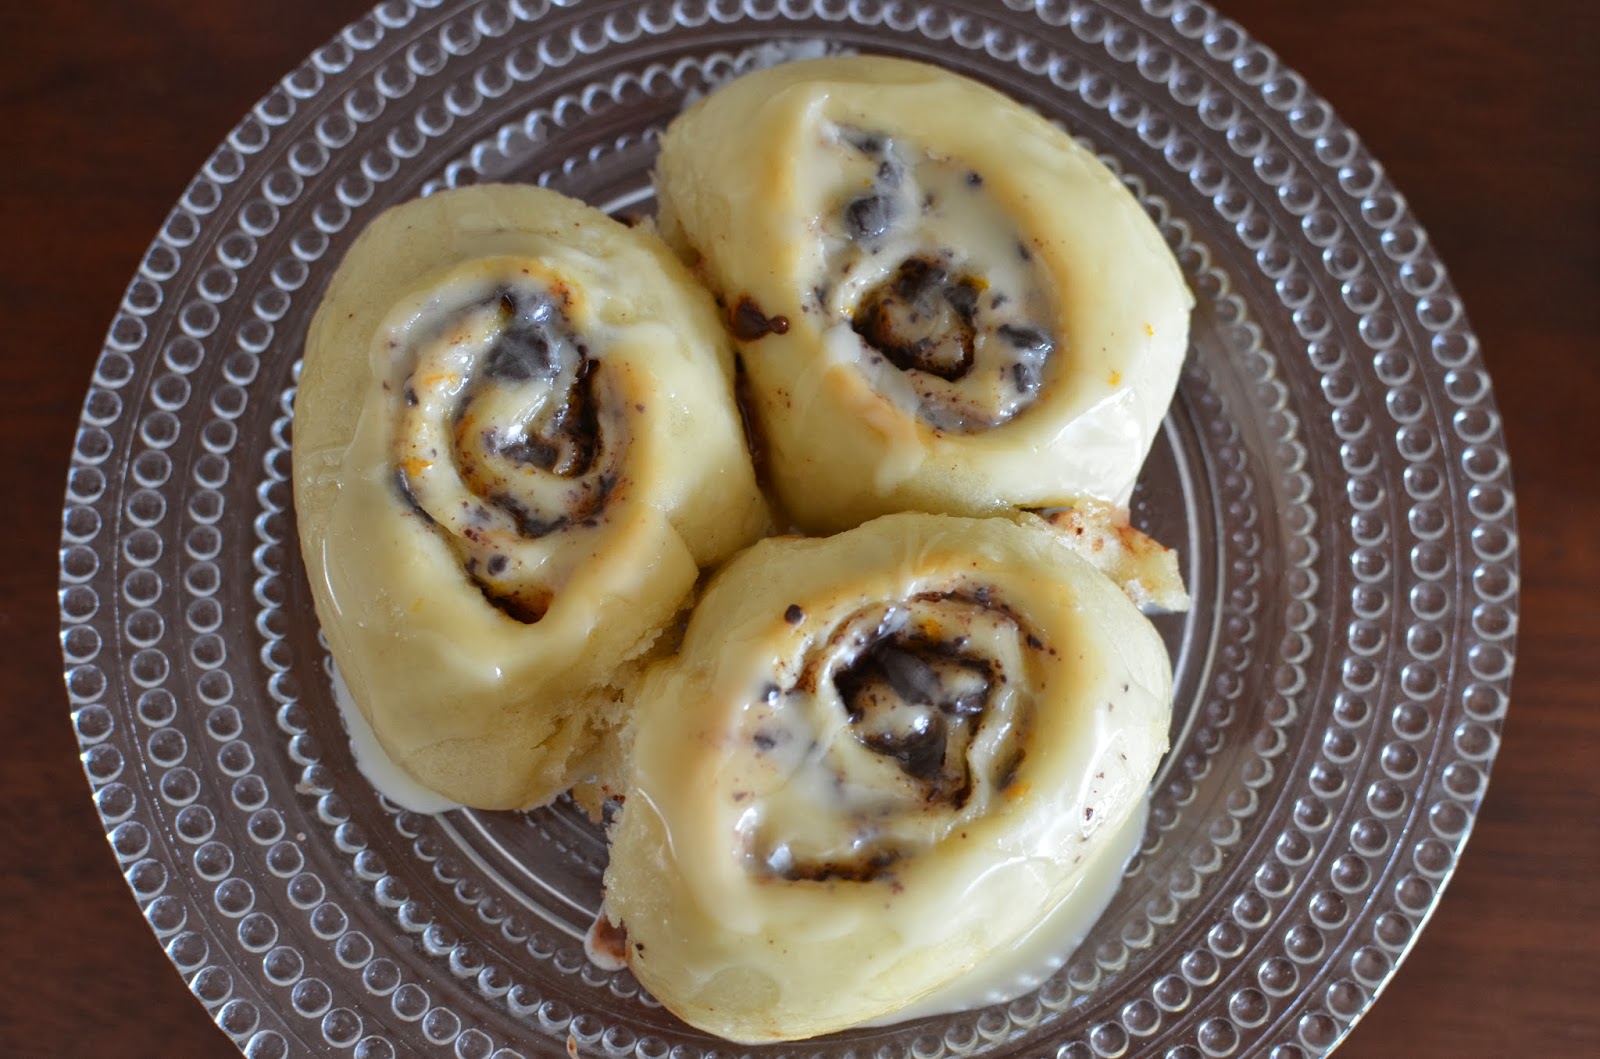 Playing with Flour: Unexplained cravings for a cinnamon roll